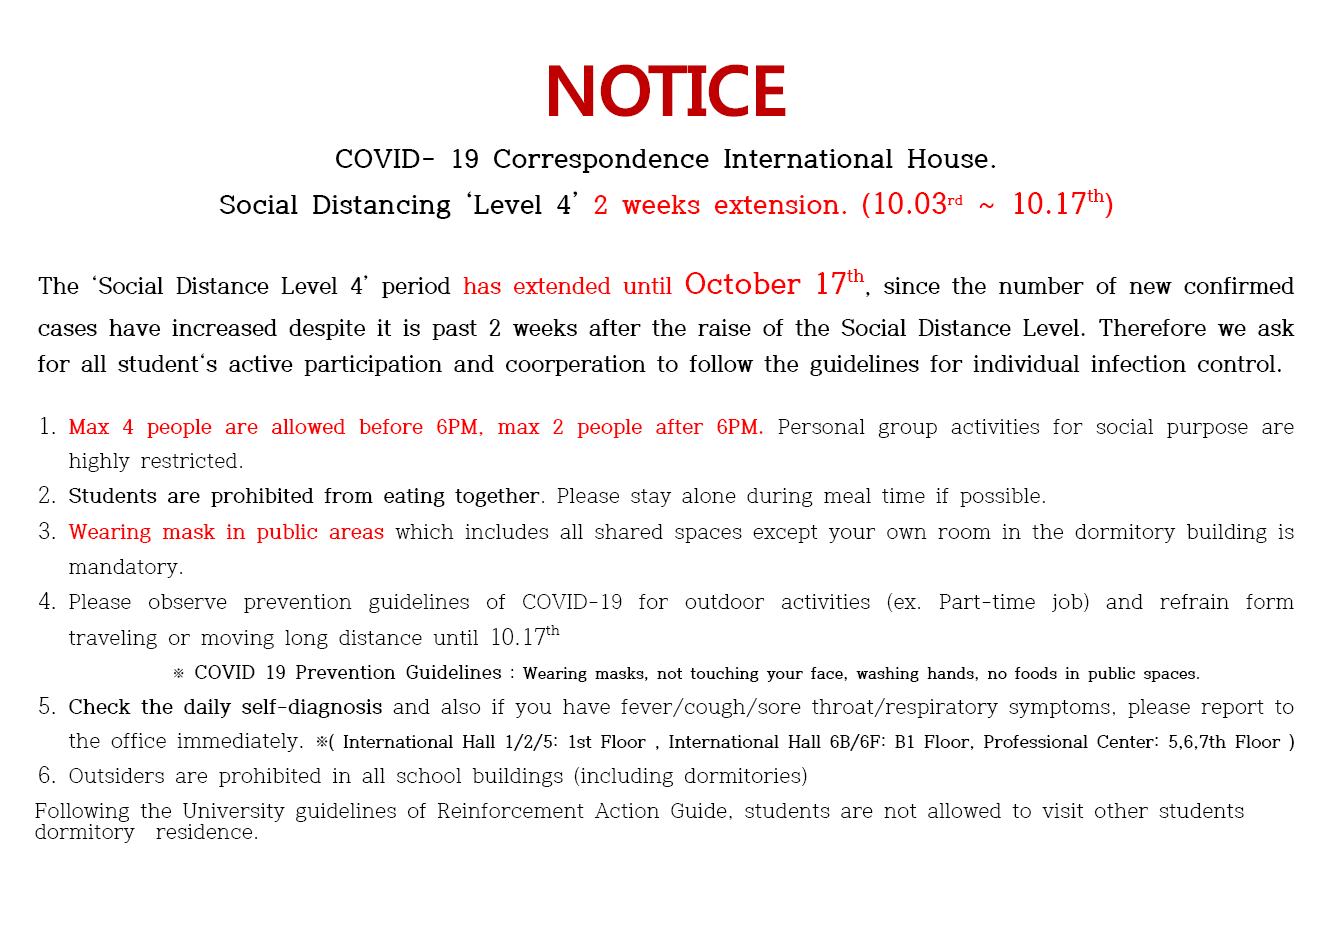 
NOTICE
COVID- 19 Correspondence International House. Social Distancing 'Level 4' 2 weeks extension. (10.03rd ~ 10.17th)
The 'Social Distance Level 4' period has extended until October 17th, since the number of new confirmed cases have increased despite it is past 2 weeks after the raise of the Social Distance Level. Therefore we ask for all student's active participation and coorperation to follow the guidelines for individual infection control.
1. Max 4 people are allowed before 6PM, max 2 people after 6PM. Personal group activities for social purpose are
highly restricted. 
2. Students are prohibited from eating together. Please stay alone during meal time if possible. 
3. Wearing mask in public areas which includes all shared spaces except your own room in the dormitory building is
mandatory. 
4. Please observe prevention guidelines of COVID-19 for outdoor activities (ex. Part-time job) and refrain form traveling or moving long distance until 10.17th
* COVID 19 Prevention Guidelines : Wearing masks, not touching your face, washing hands, no foods in public spaces 5. Check the daily self-diagnosis and also if you have fever/cough/sore throat/respiratory symptoms, please report to
the office immediately. *( International Hall 1/2/5: 1st Floor, International Hall 6B/6F: B1 Floor, Professional Center: 5,6,7th Floor ) 6. Outsiders are prohibited in all school buildings (including dormitories) Following the University guidelines of Reinforcement Action Guide, students are not allowed to visit other students dormitory residence.

